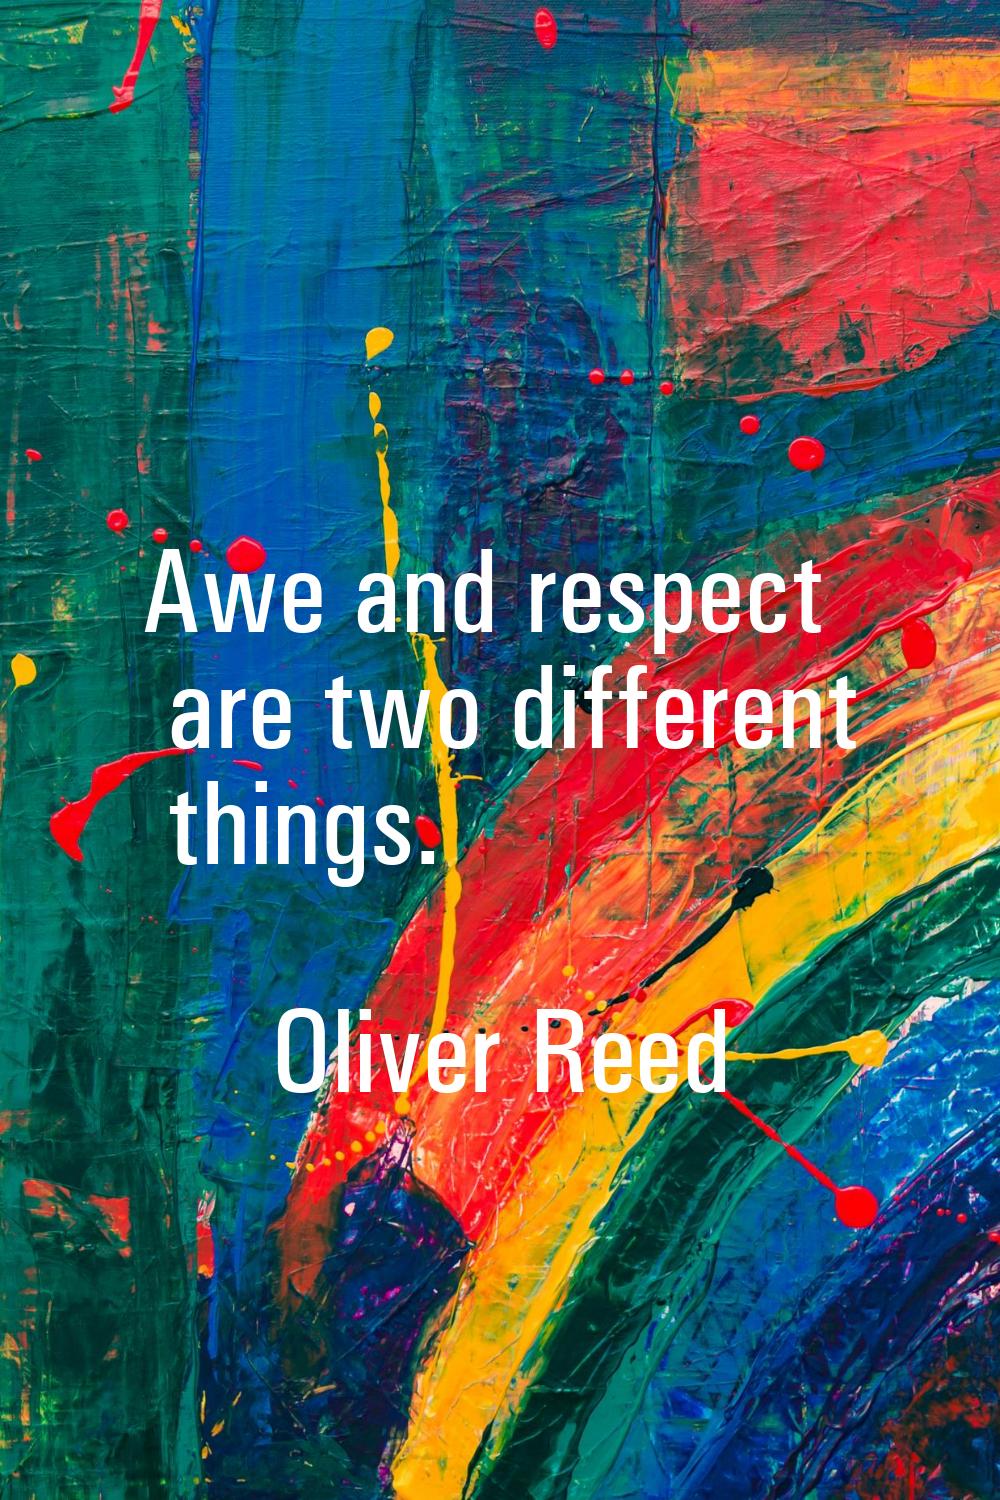 Awe and respect are two different things.